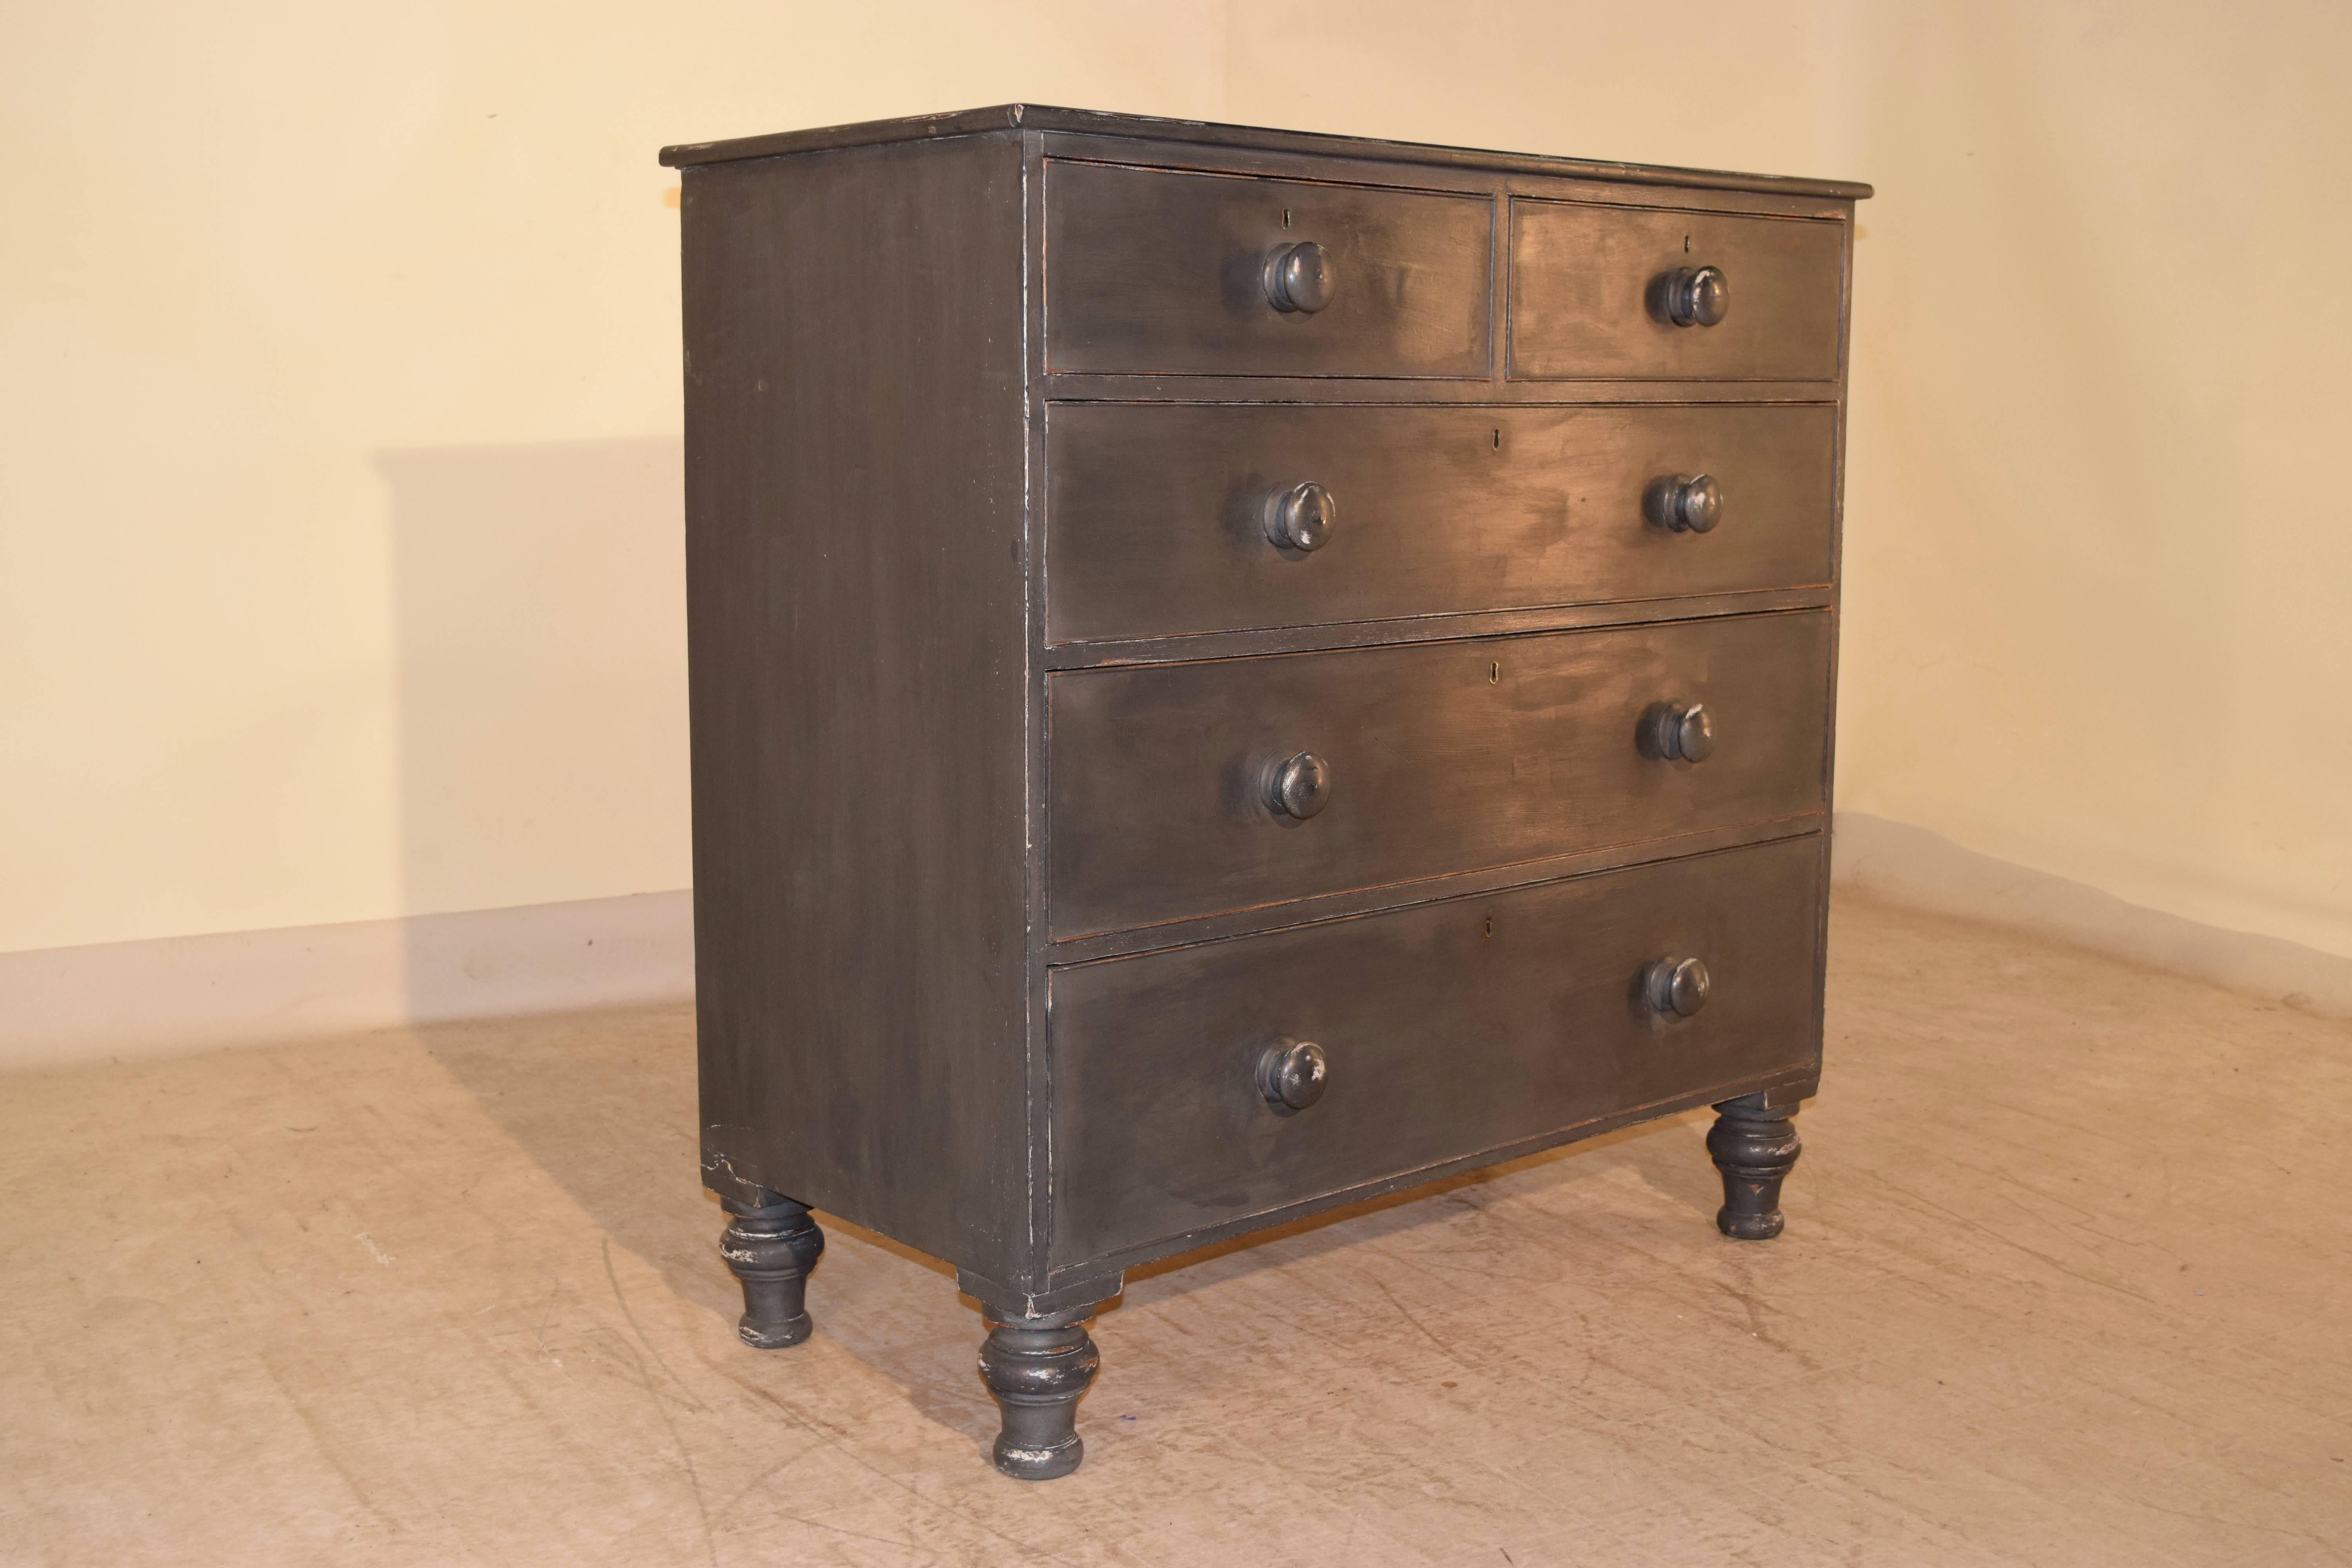 19th century English chest of drawers made from mahogany and painted in charcoal gray. The top has a beveled edge and follows down to two drawers over three drawers. It is raised on hand turned feet.